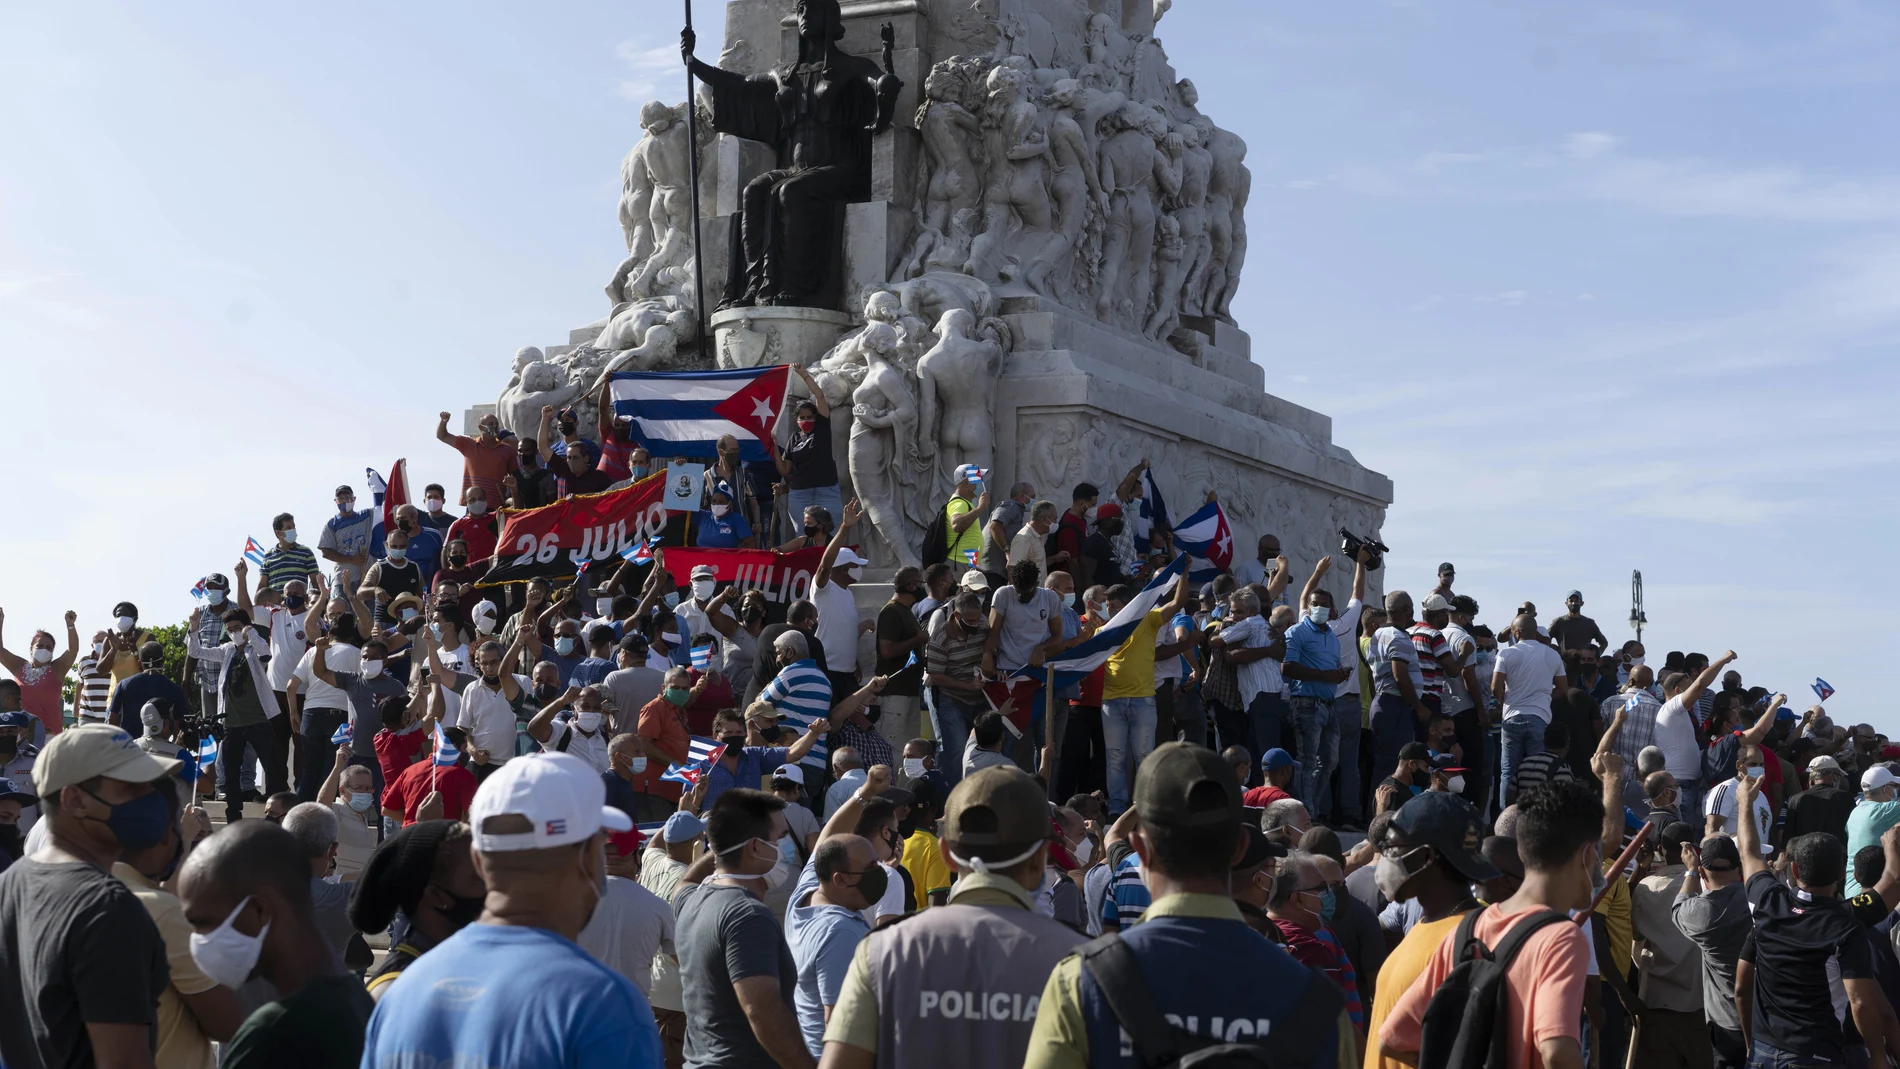 CORRECTS TO GOVERNMENT SUPPORTERS - Government supporters gather at the Maximo Gomez monument in Havana, Cuba, Sunday, July 11, 2021. Supporters of the government took to the streets at the time hundreds more protested against ongoing food shortages and high prices of foodstuffs.. (AP Photo/Eliana Aponte)